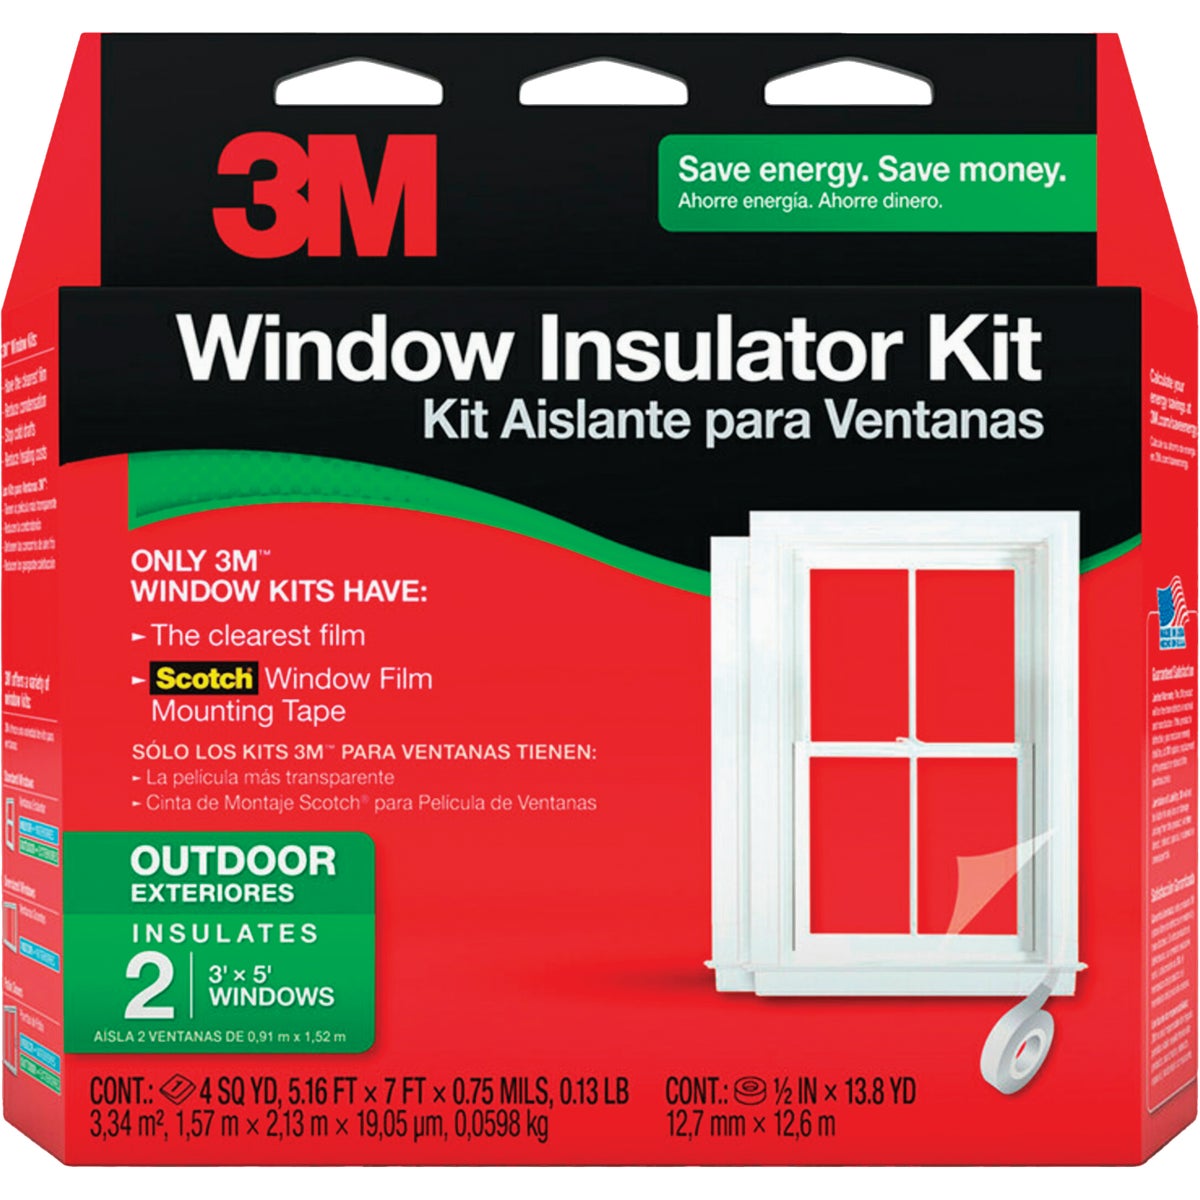 Item 264180, The 3M Outdoor Window Insulator Kit, will help protect your home from the 